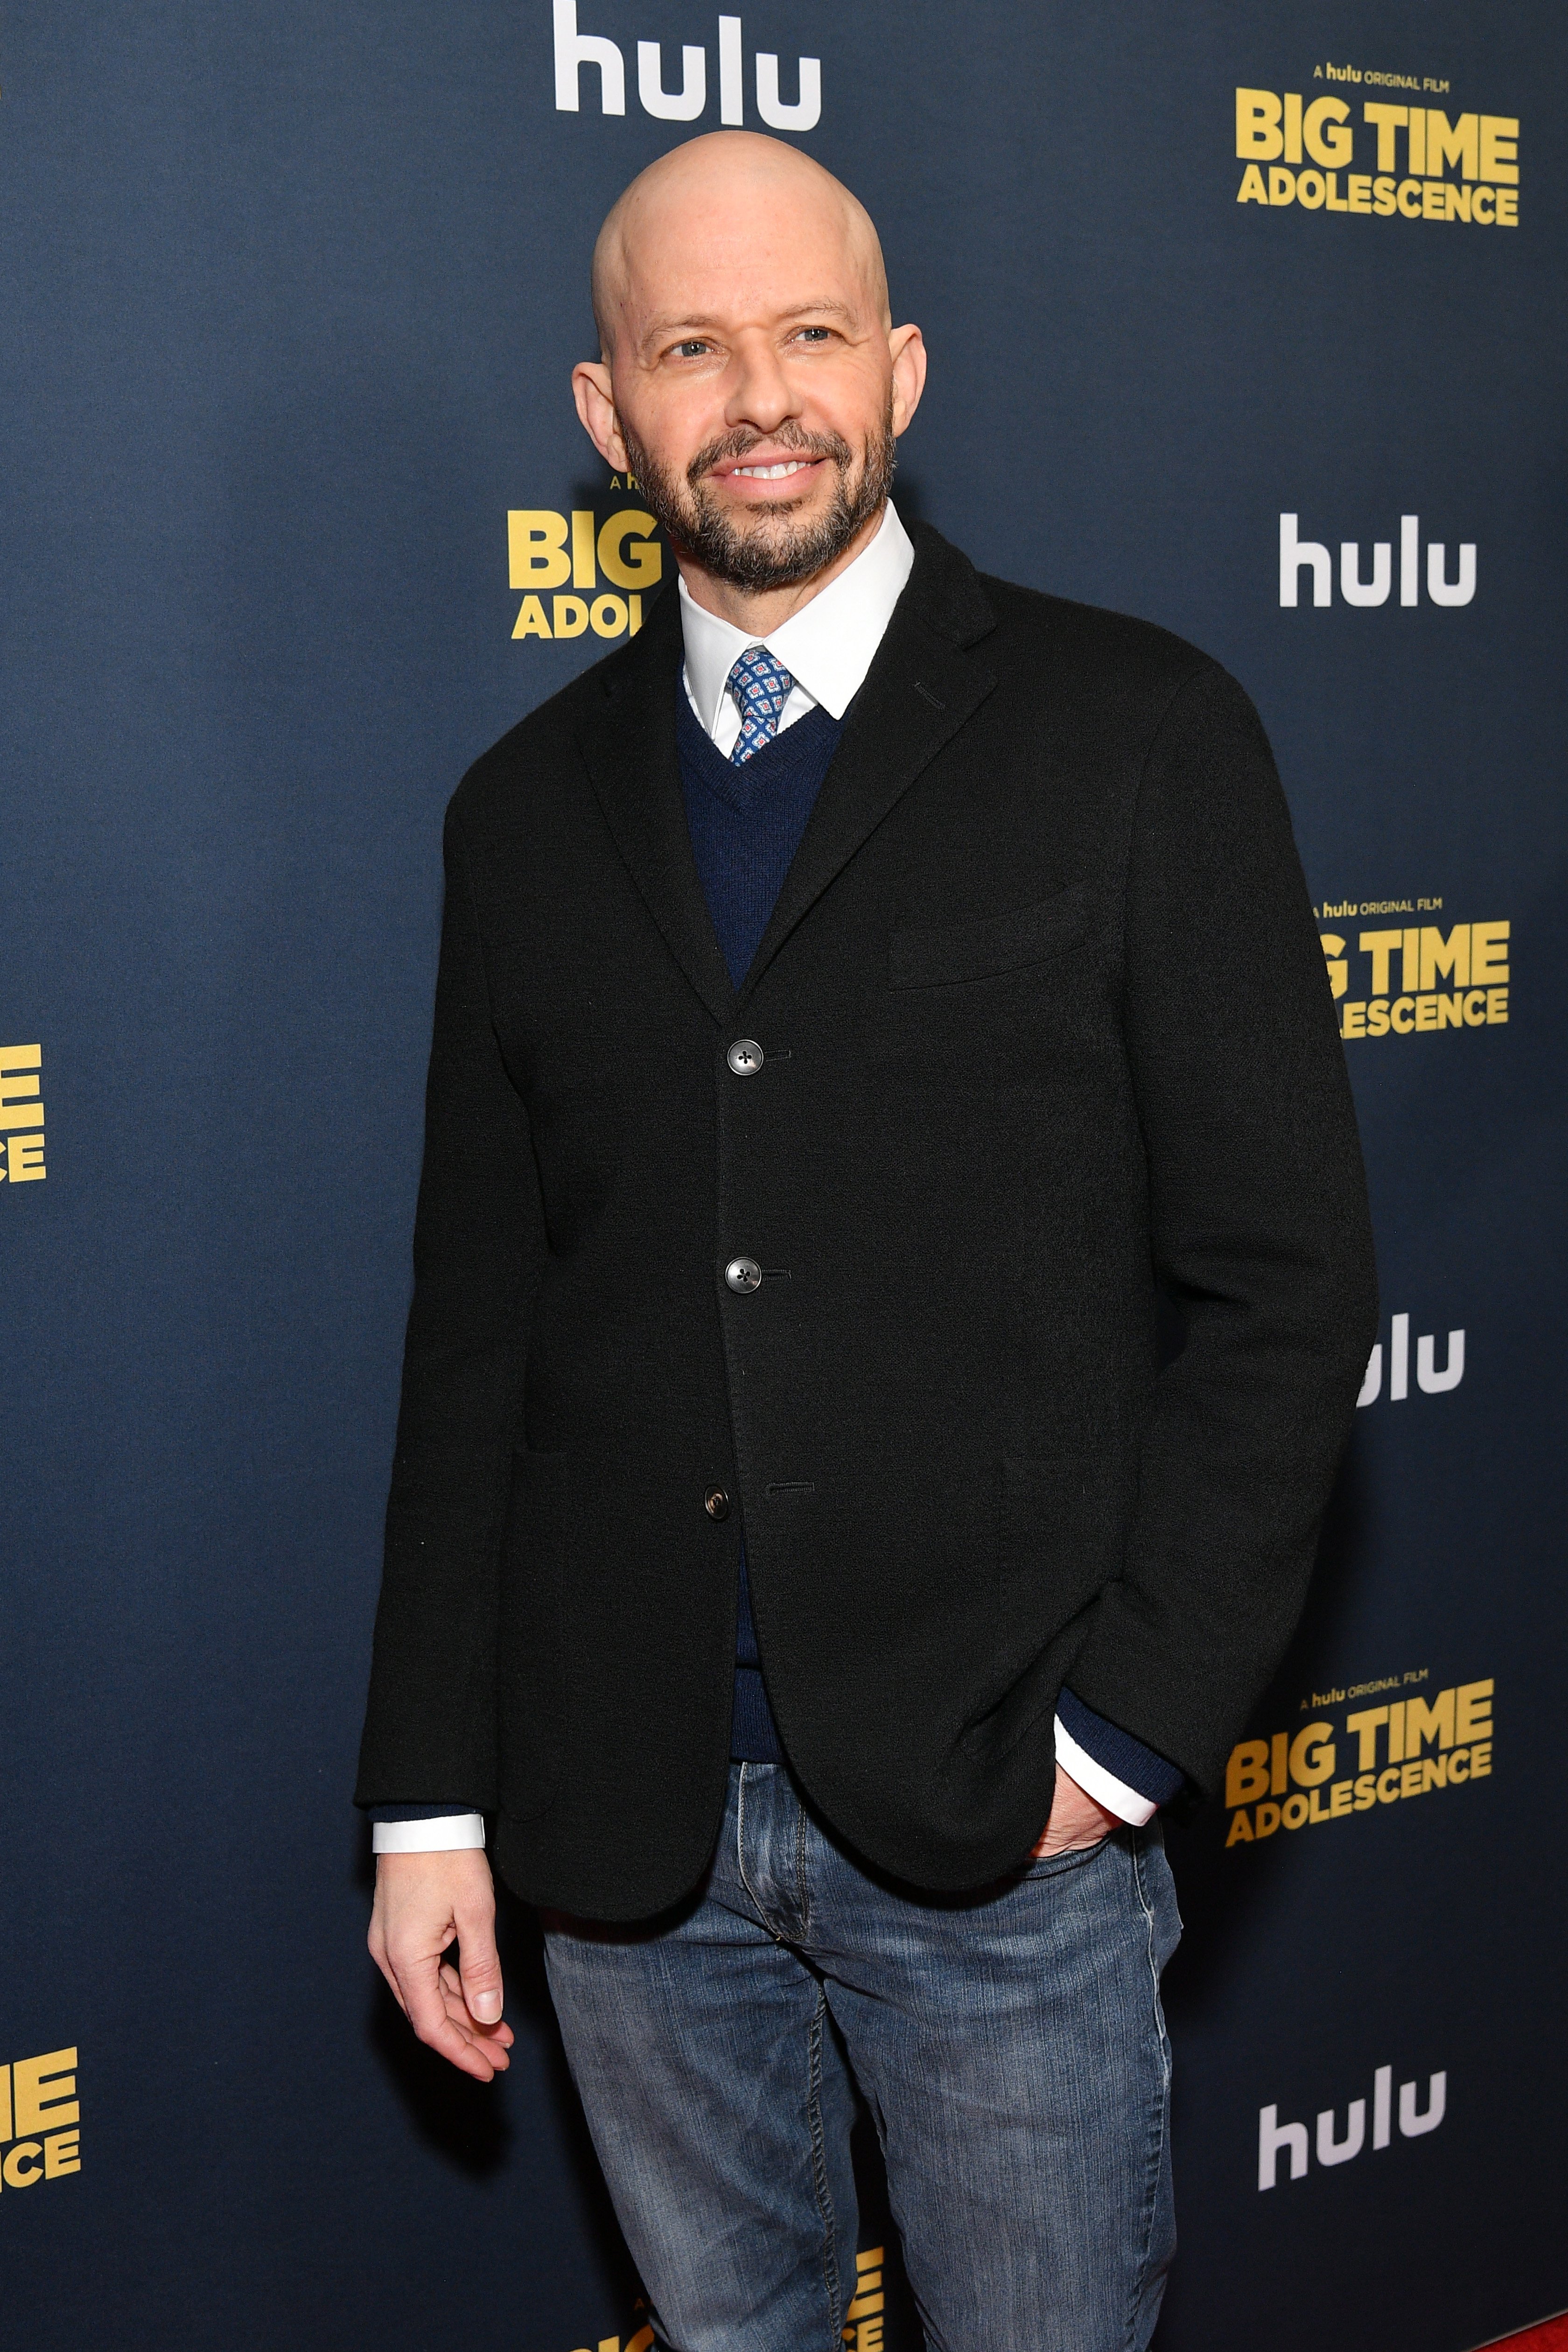 Jon Cryer attends the "Big Time Adolescence" premiere at Metrograph on March 05, 2020, in New York City. | Source: Getty Images